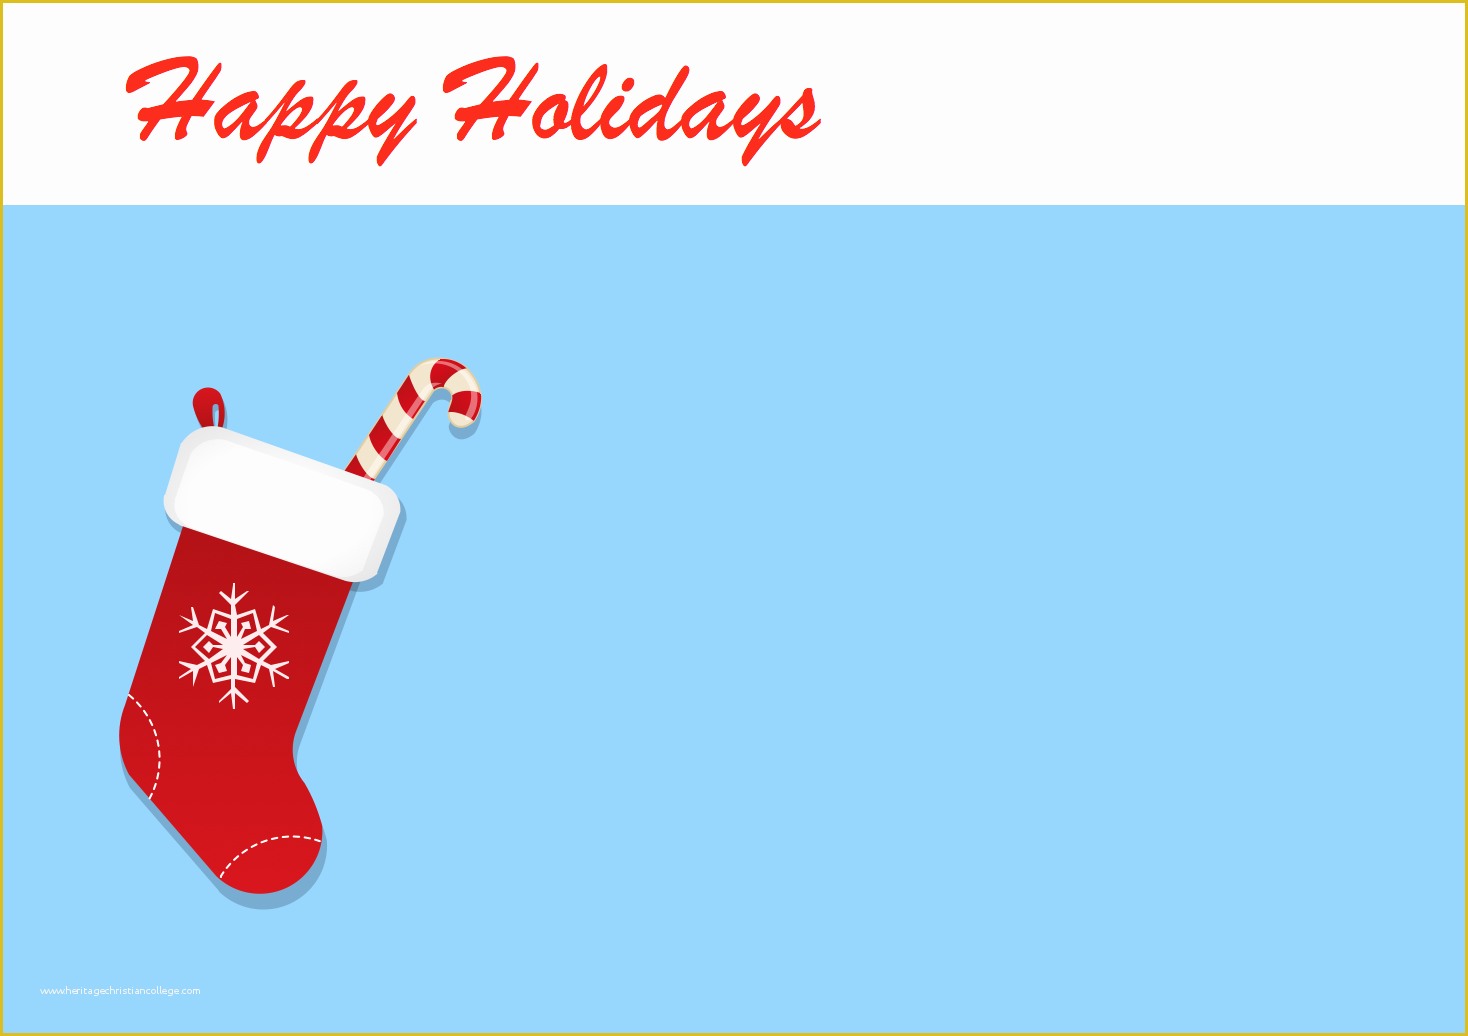 Free Business Holiday Card Templates Of 11 Happy Holiday Card Templates Happy Holiday